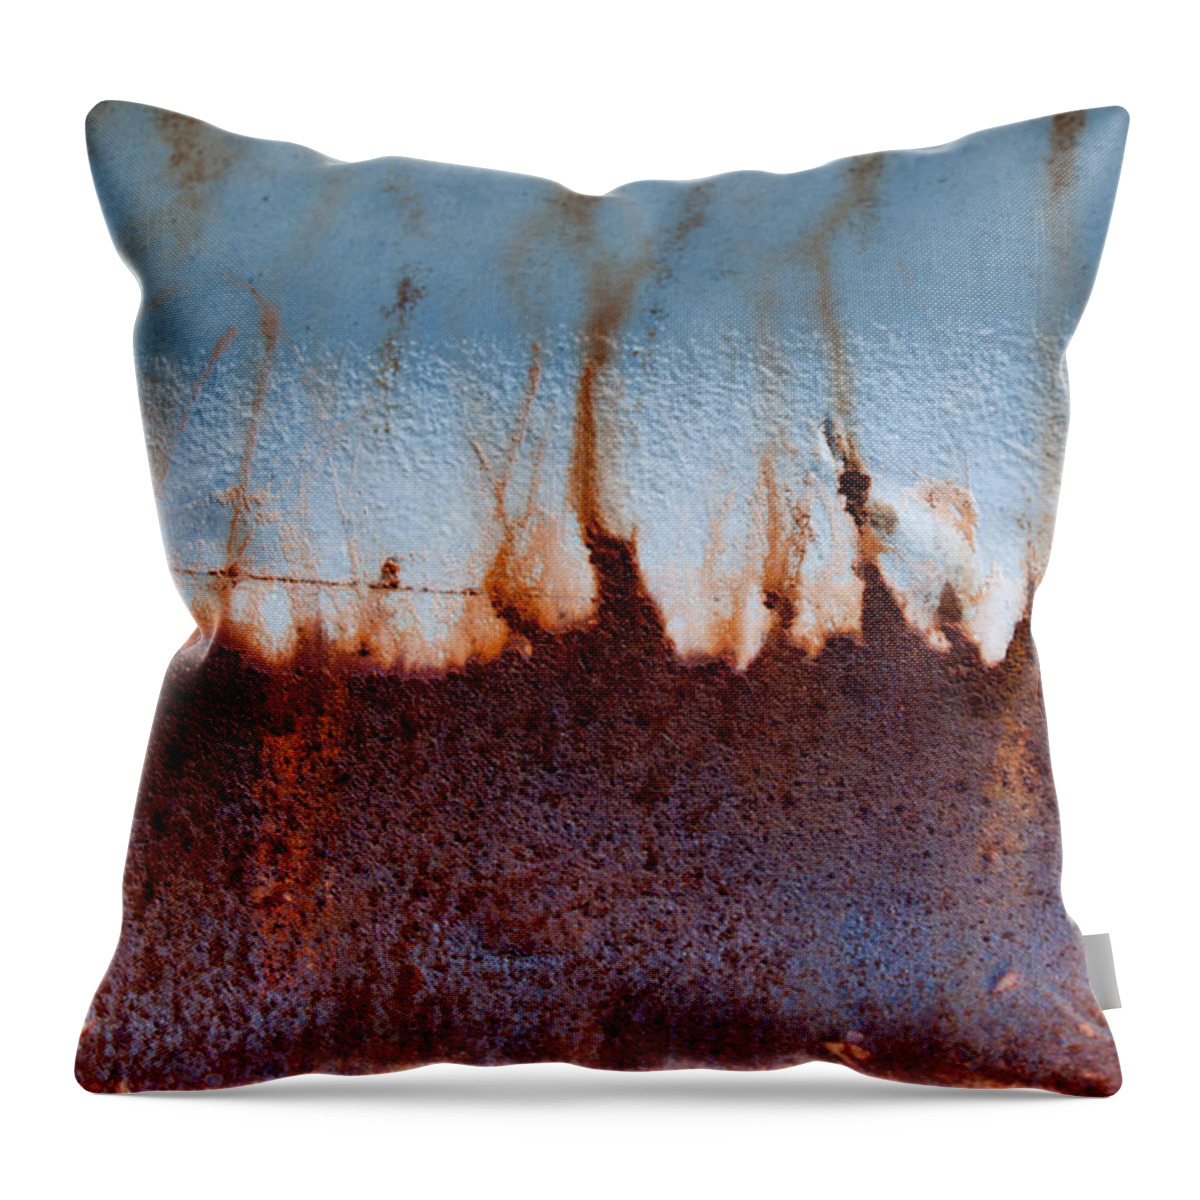 Industrial Throw Pillow featuring the photograph Sunrise Abstract by Jani Freimann